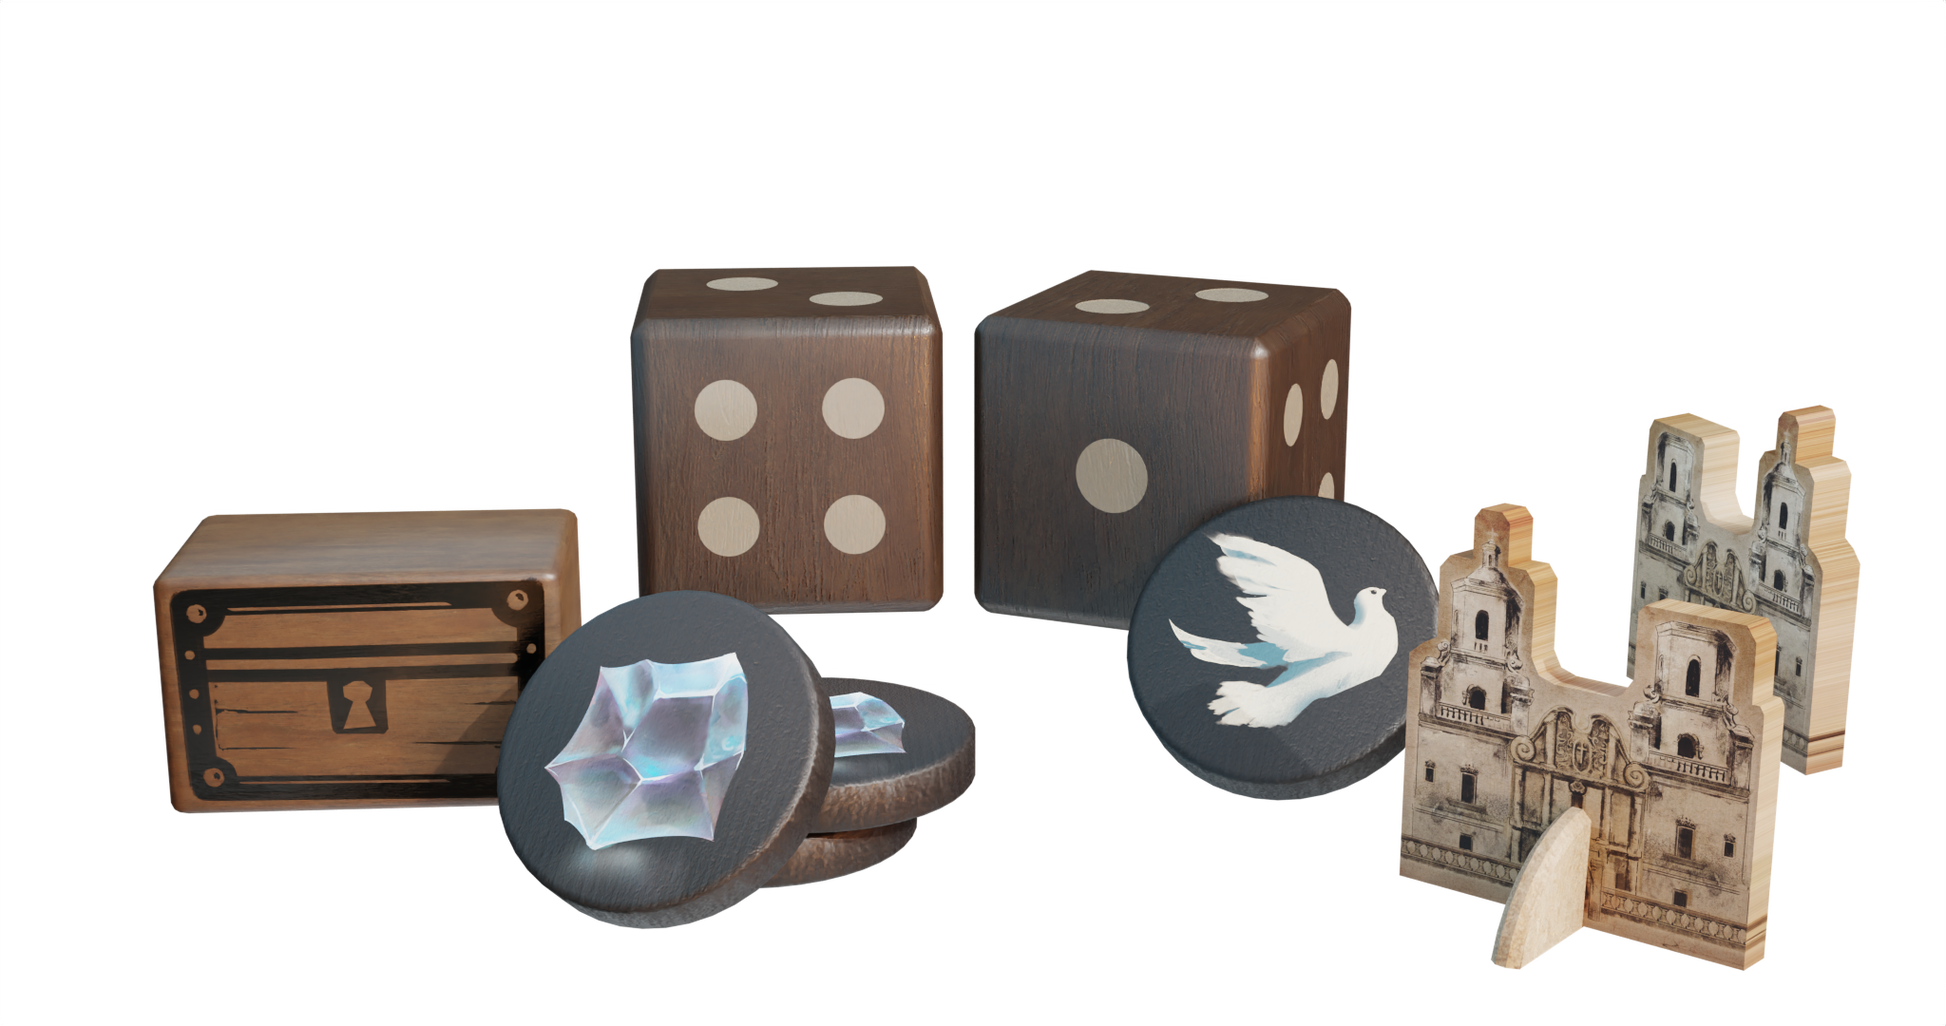 Pax Hispanica board game - dice and tokens